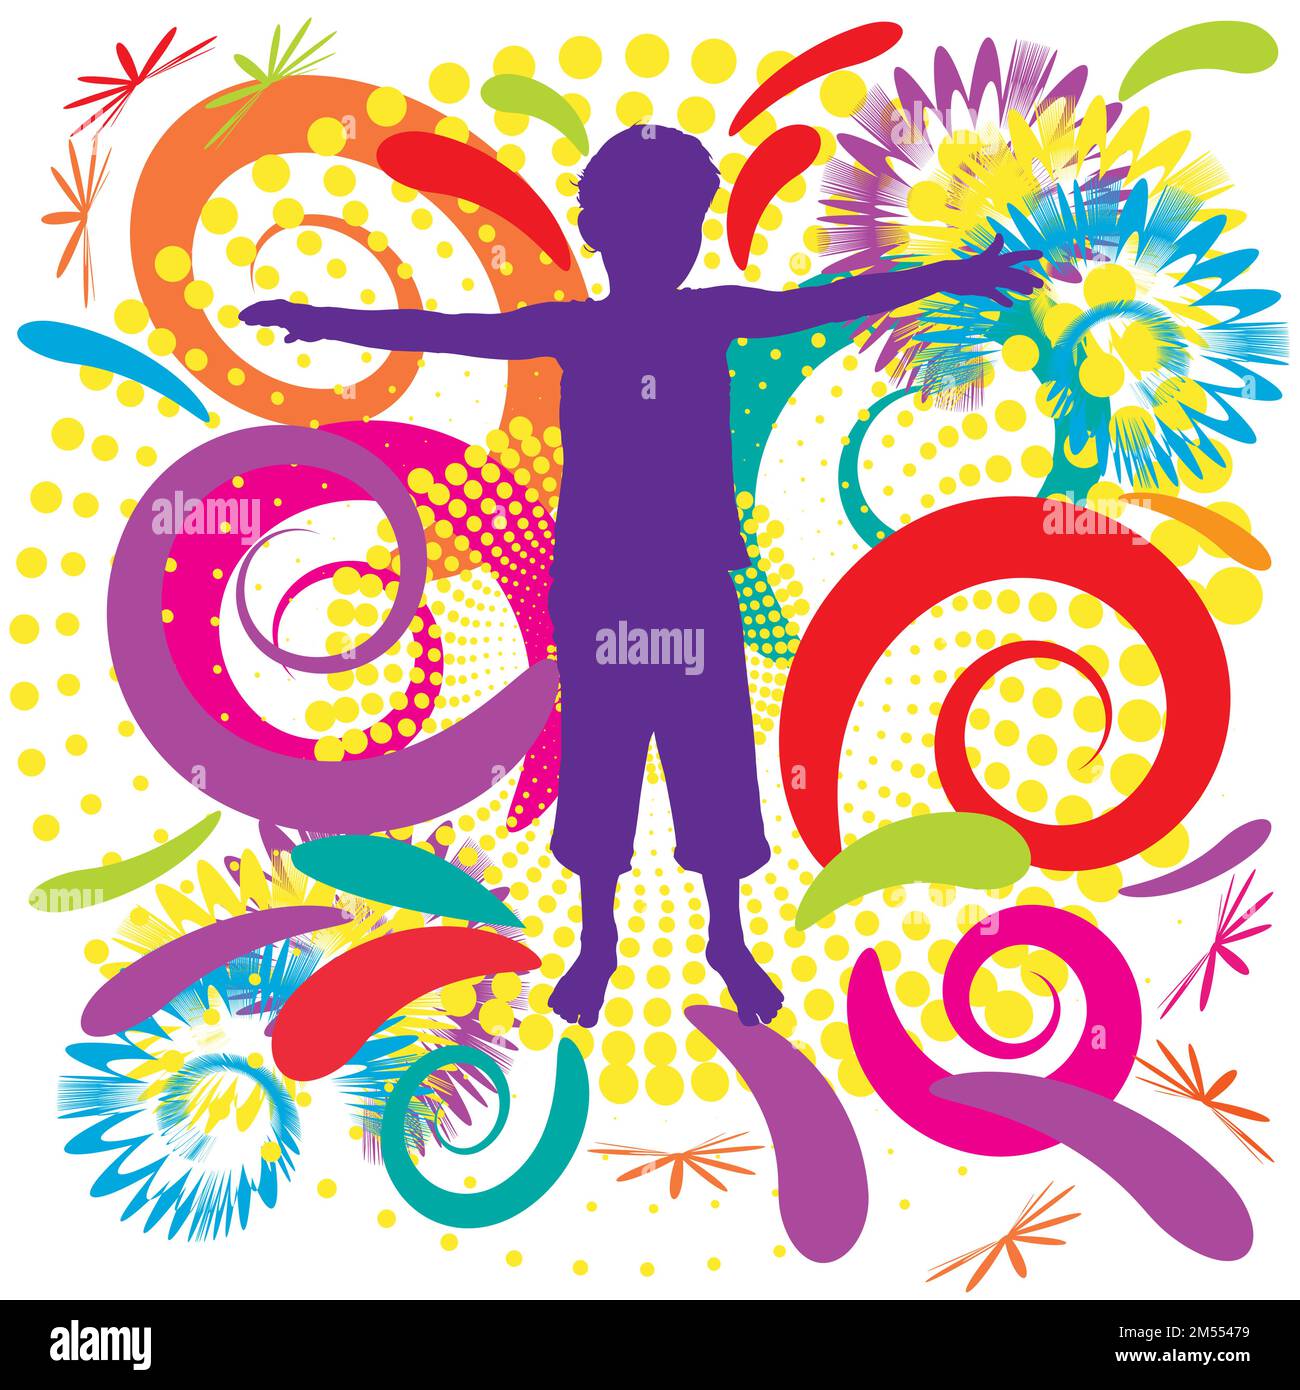 Child silhouette with colorful swirly background; purple silhouette with swirl effect in the back Stock Vector